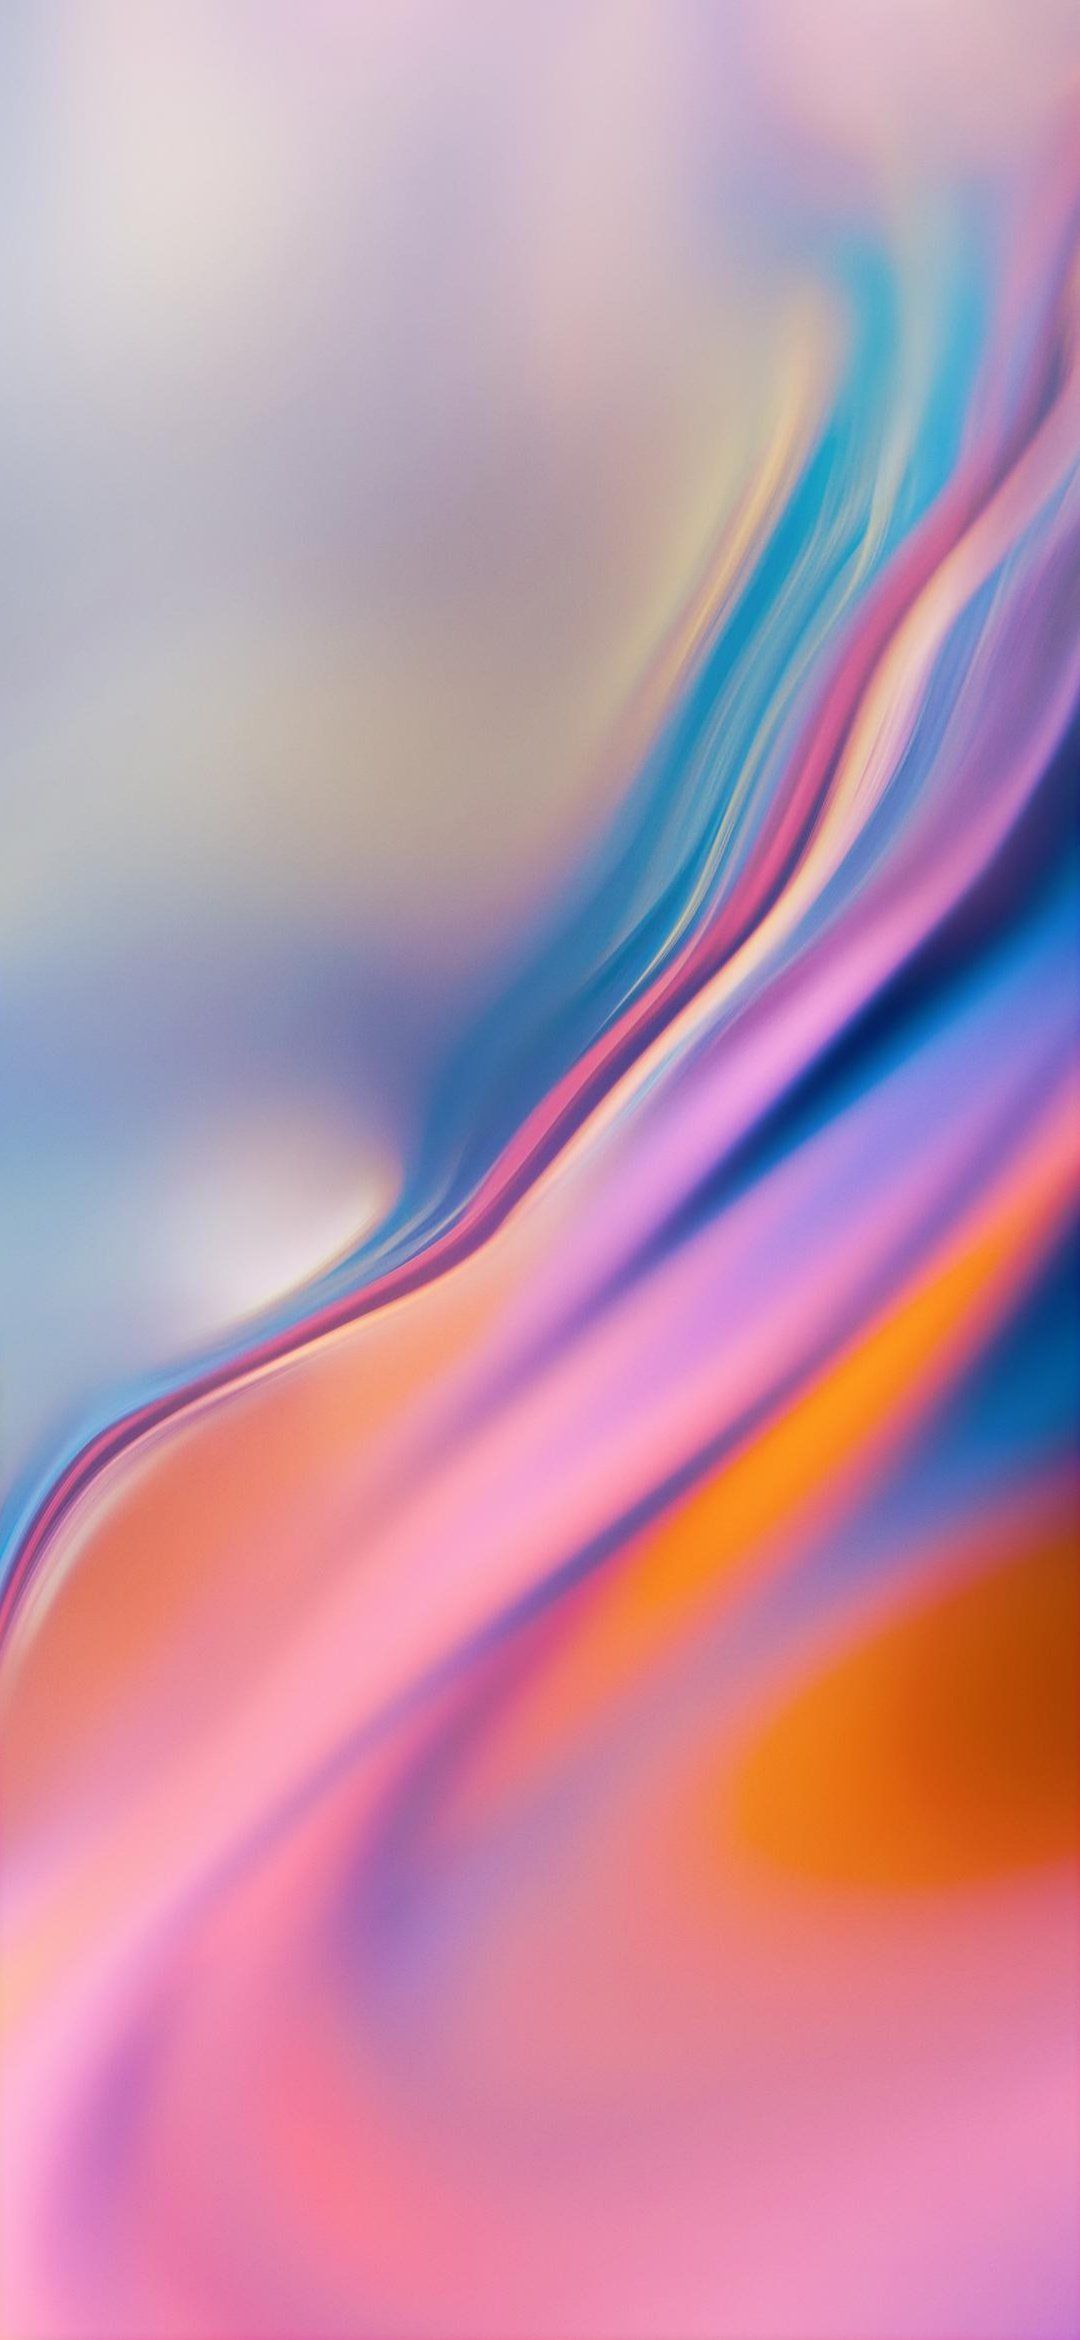 Abstract Wallpapers in 2020